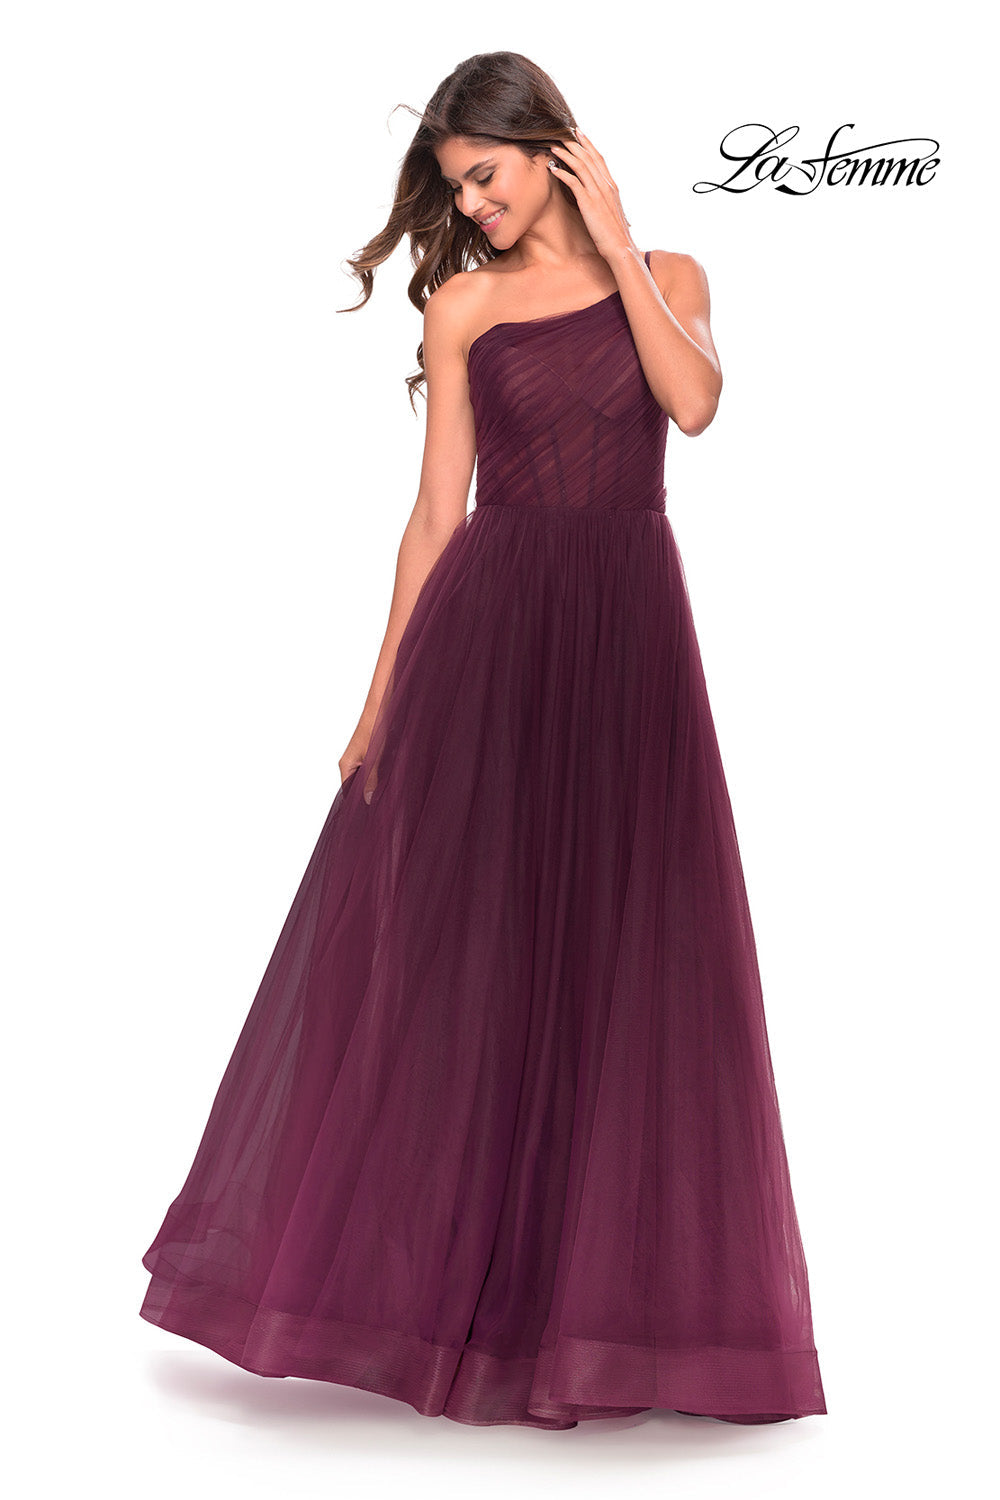 La Femme 31069 prom dress images.  La Femme 31069 is available in these colors: Black, Dark Berry, Dark Emerald, Navy.